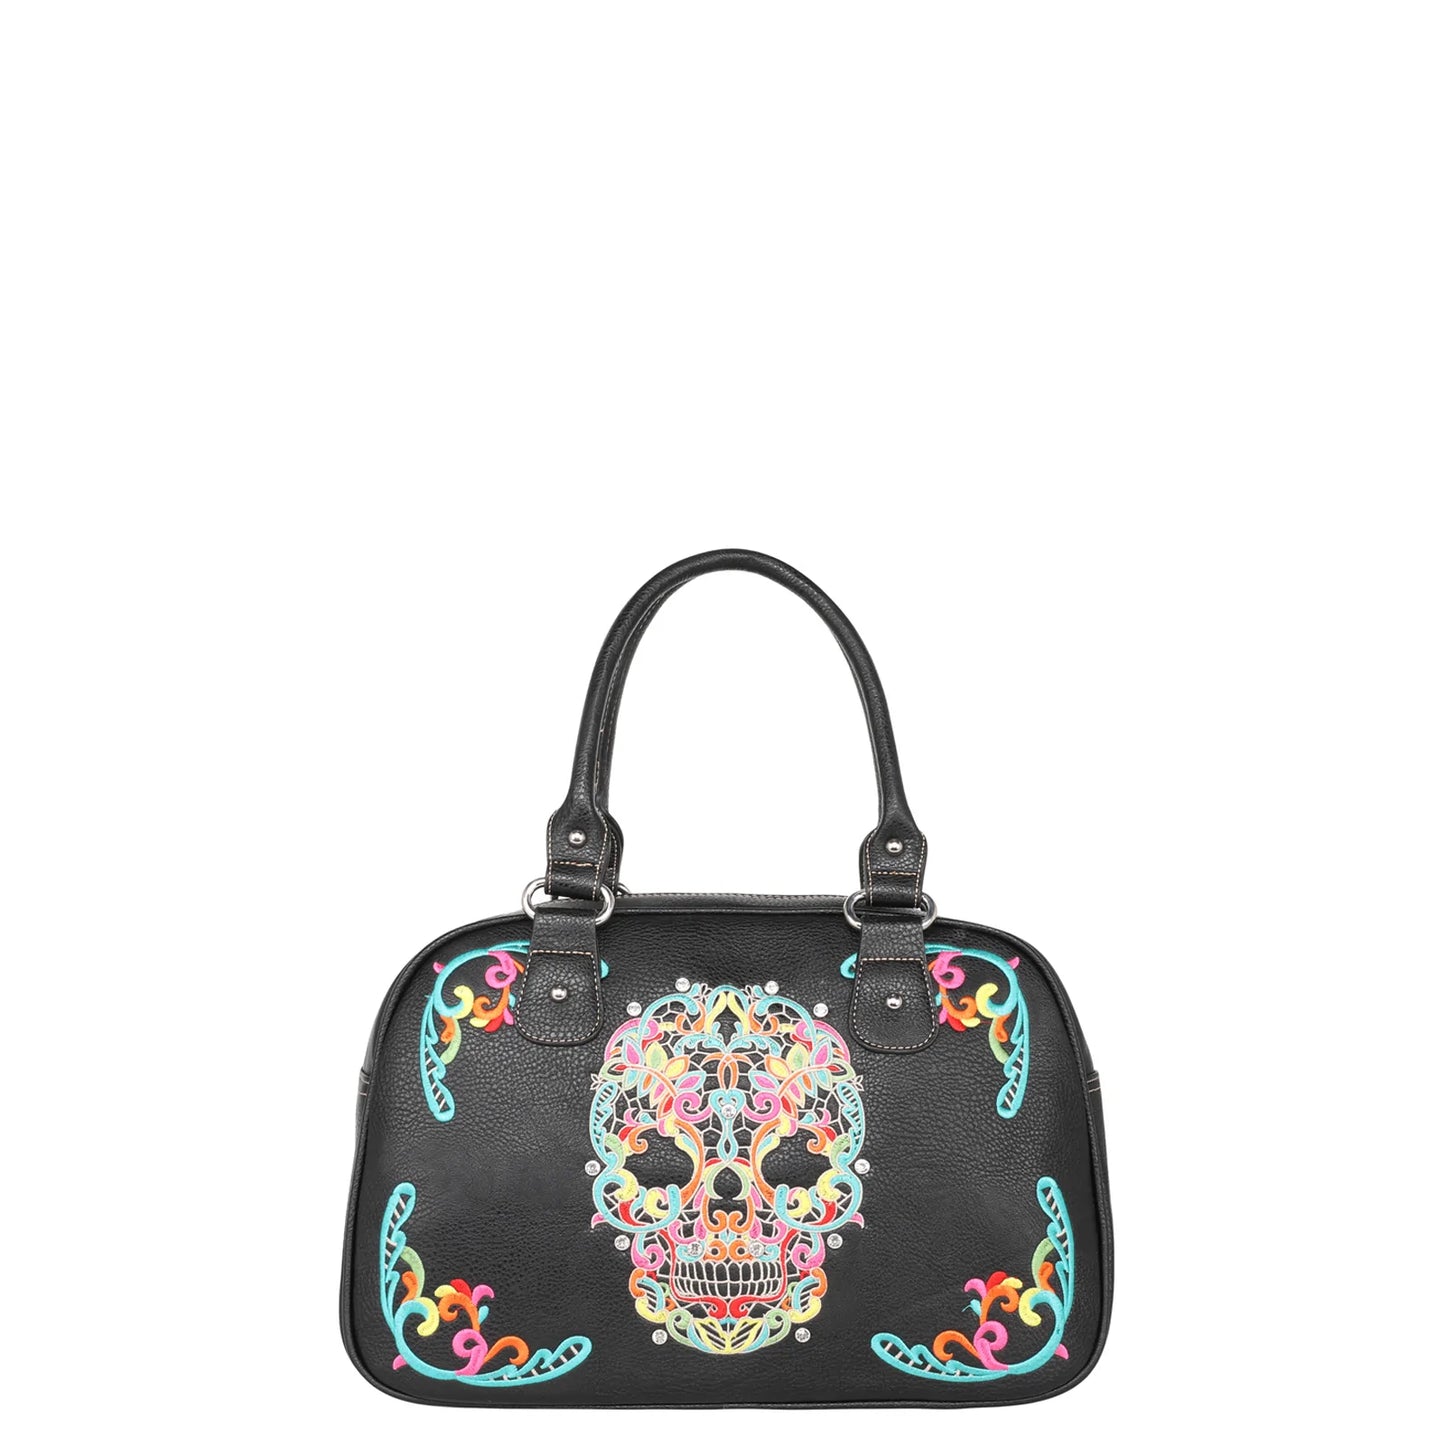 Montana West Sugar Skull Collection 3 PC Luggage Set – Dazzled